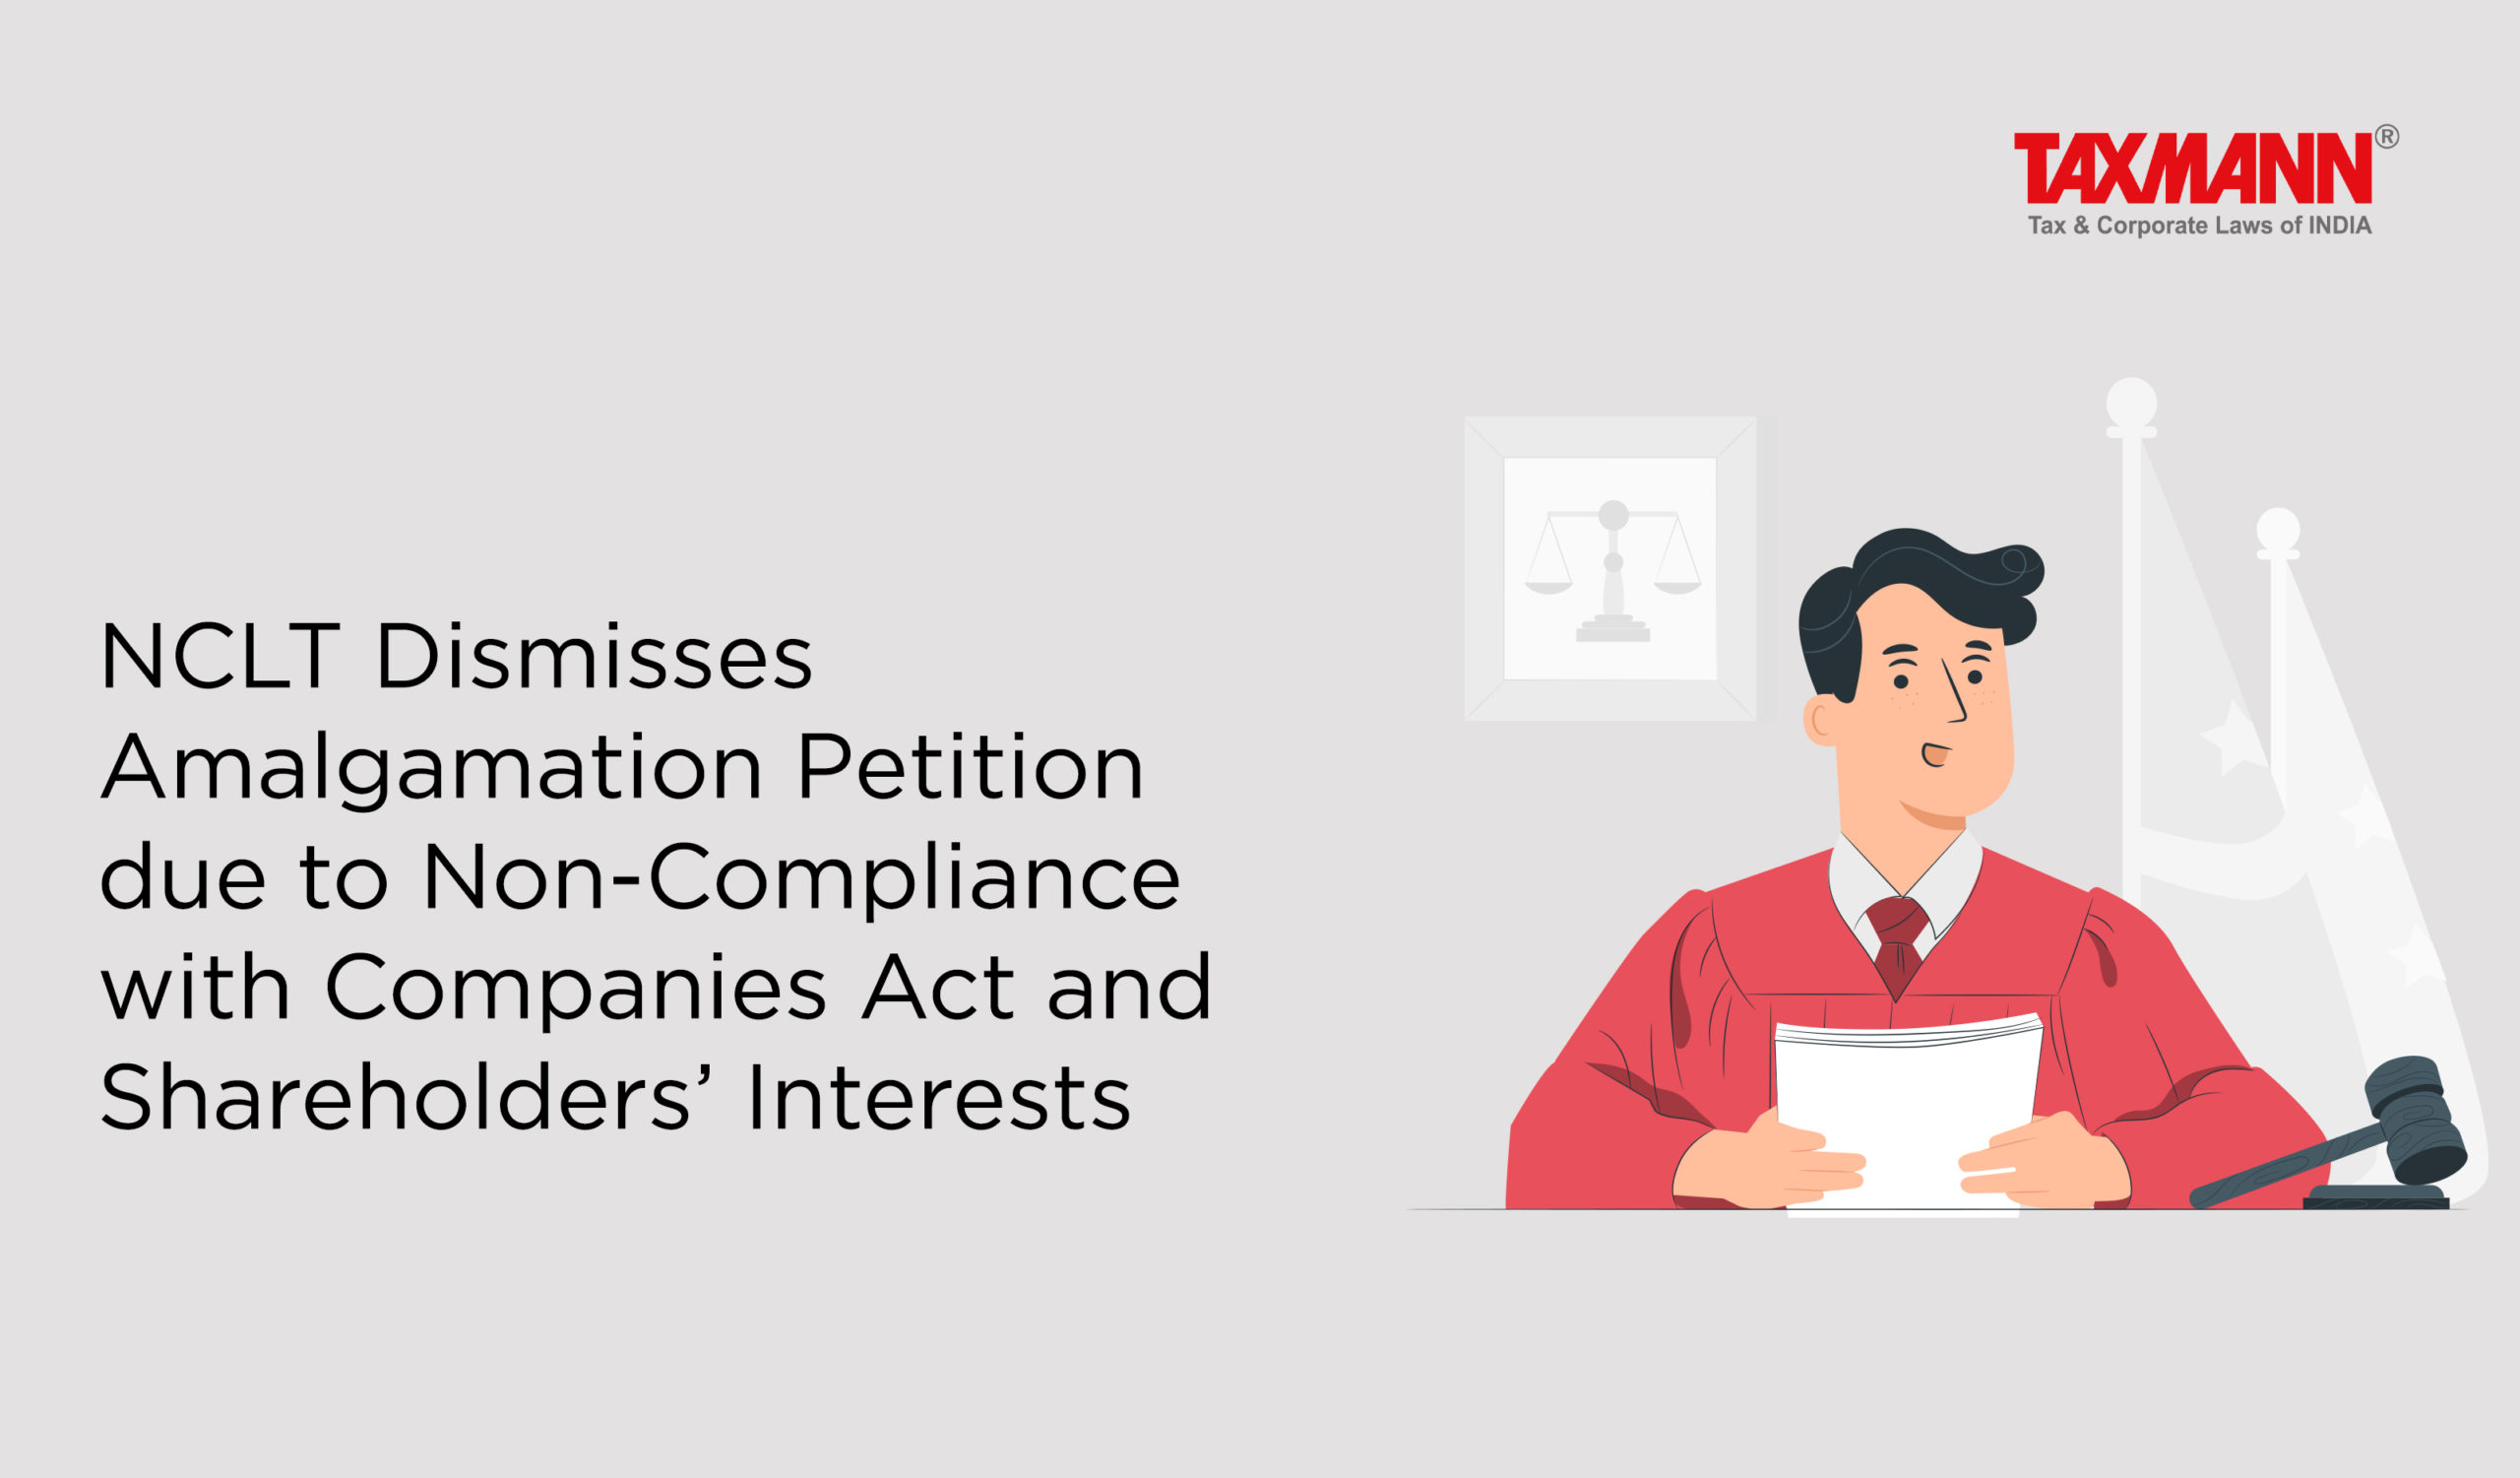 Non-Compliance with Companies Act and Shareholders' Interests